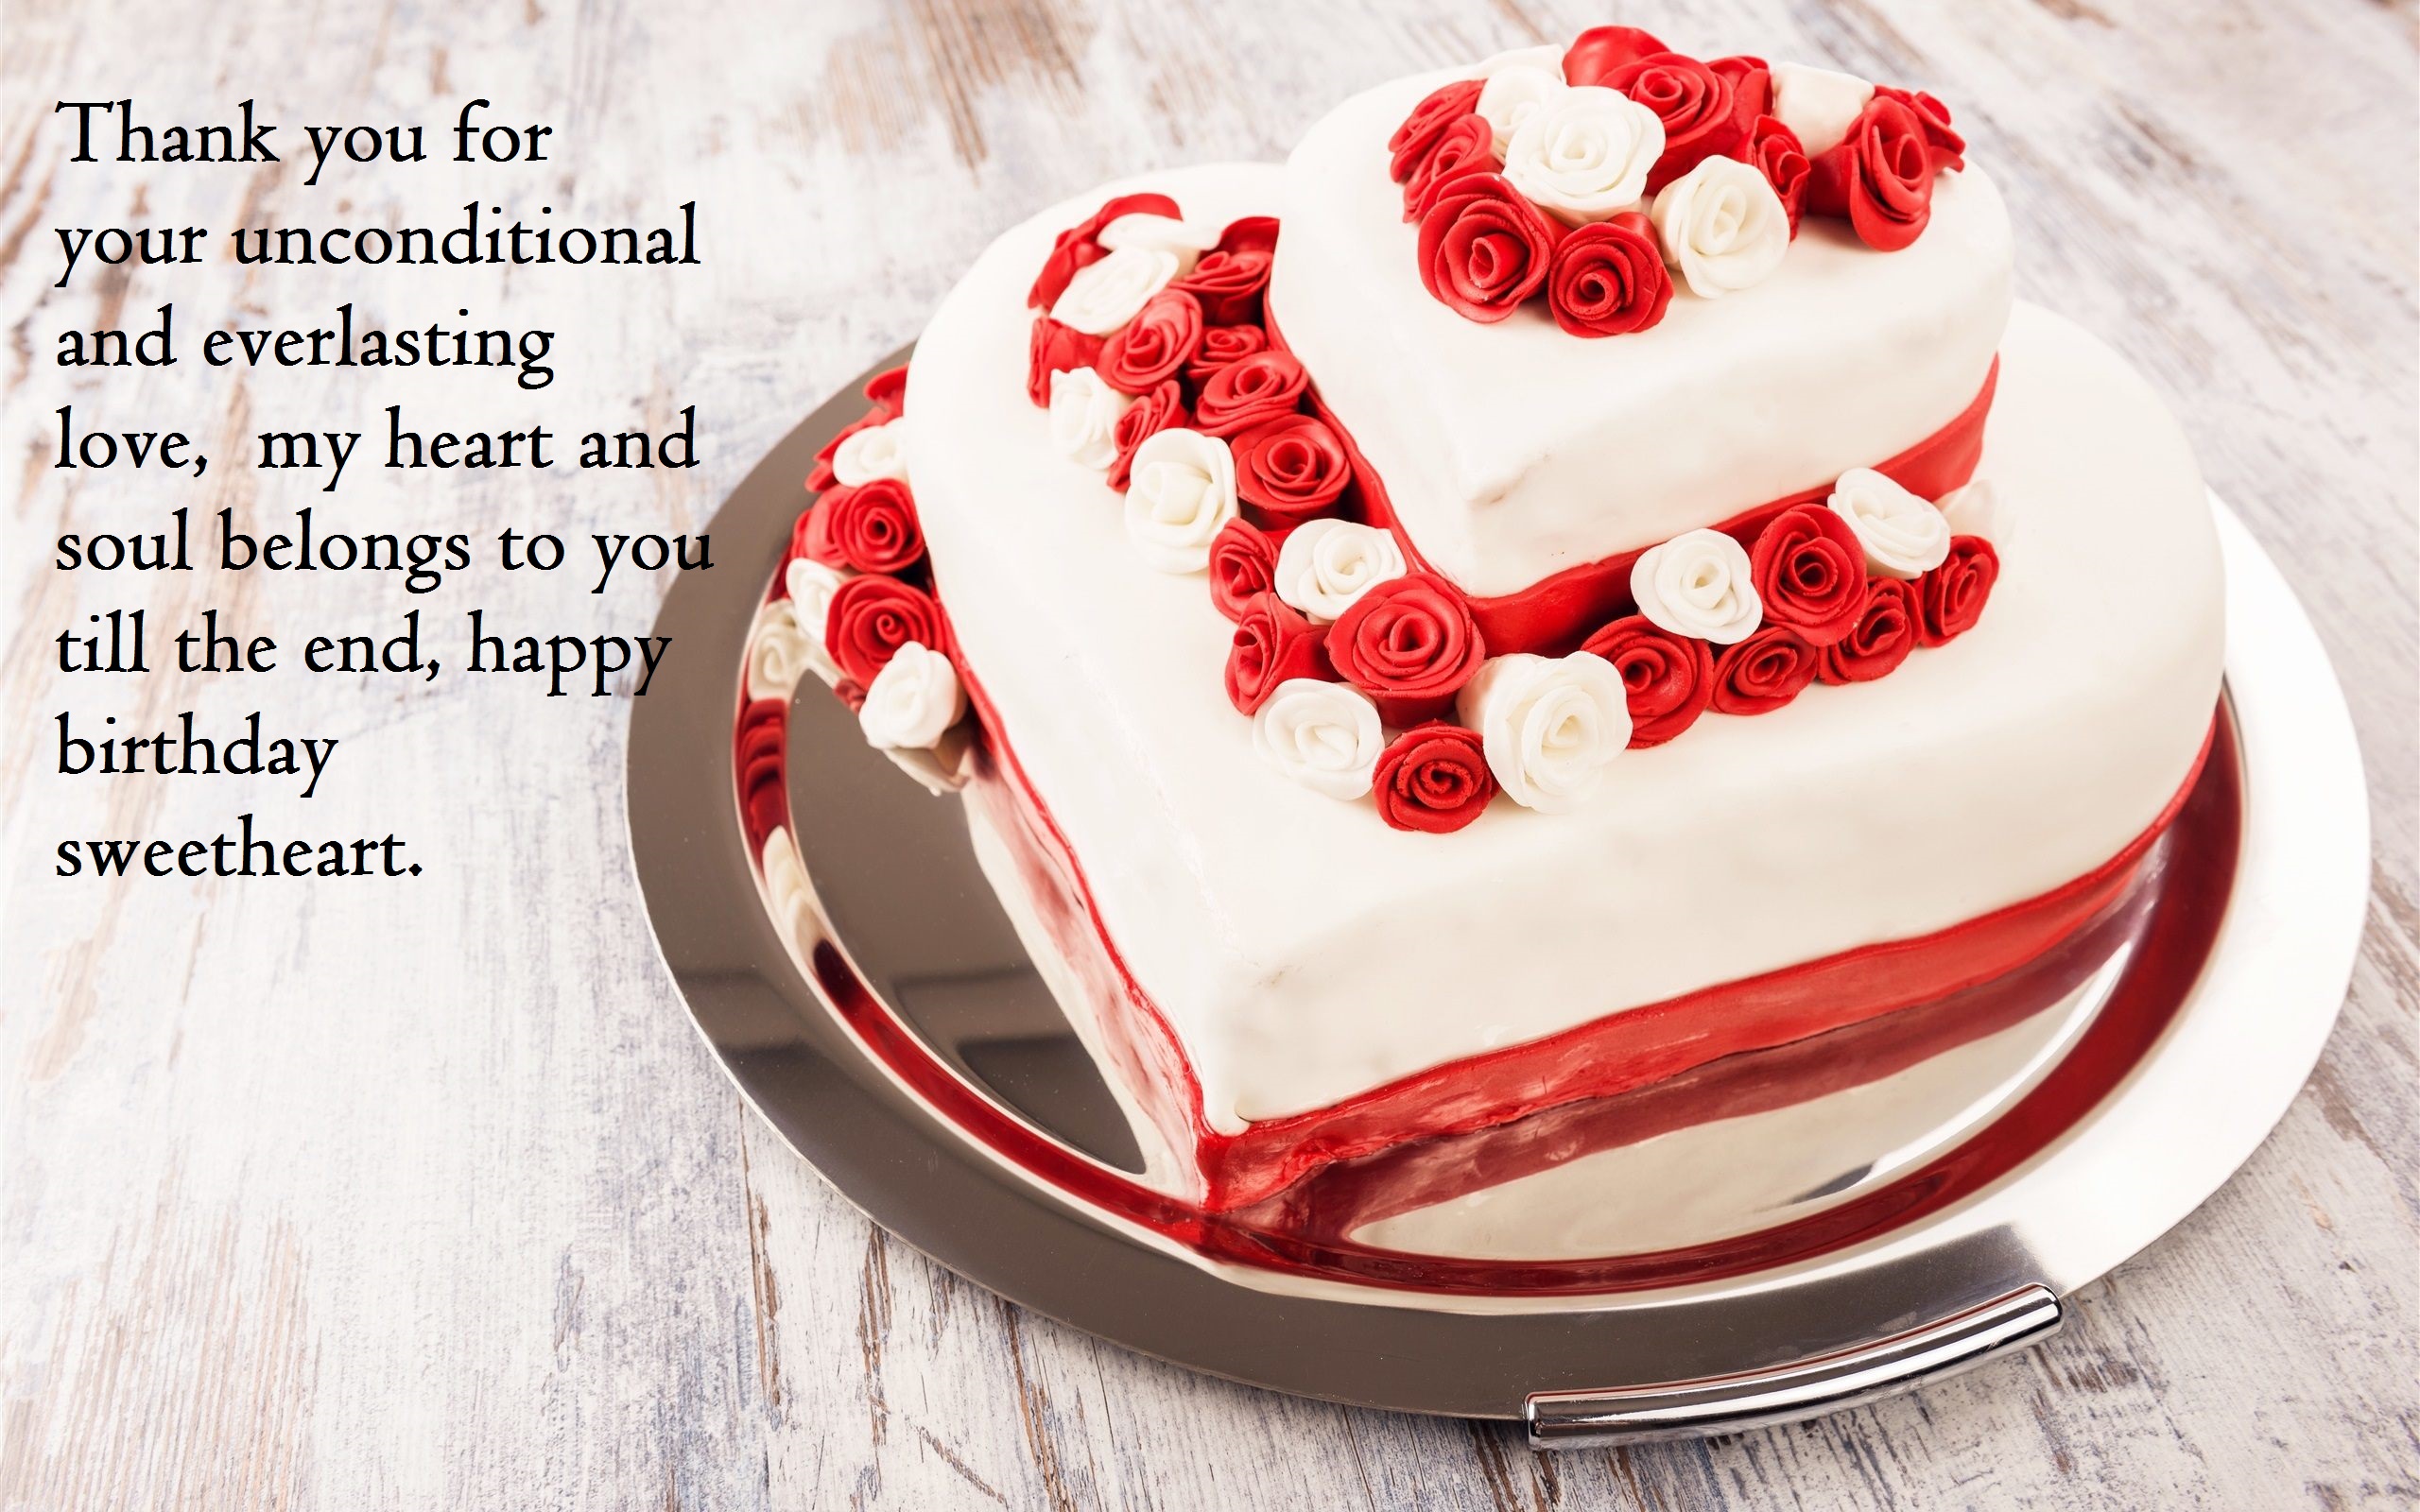 Happy Birthday Cake Images With Wishes For Wife - Love Happy Birthday Cake - HD Wallpaper 